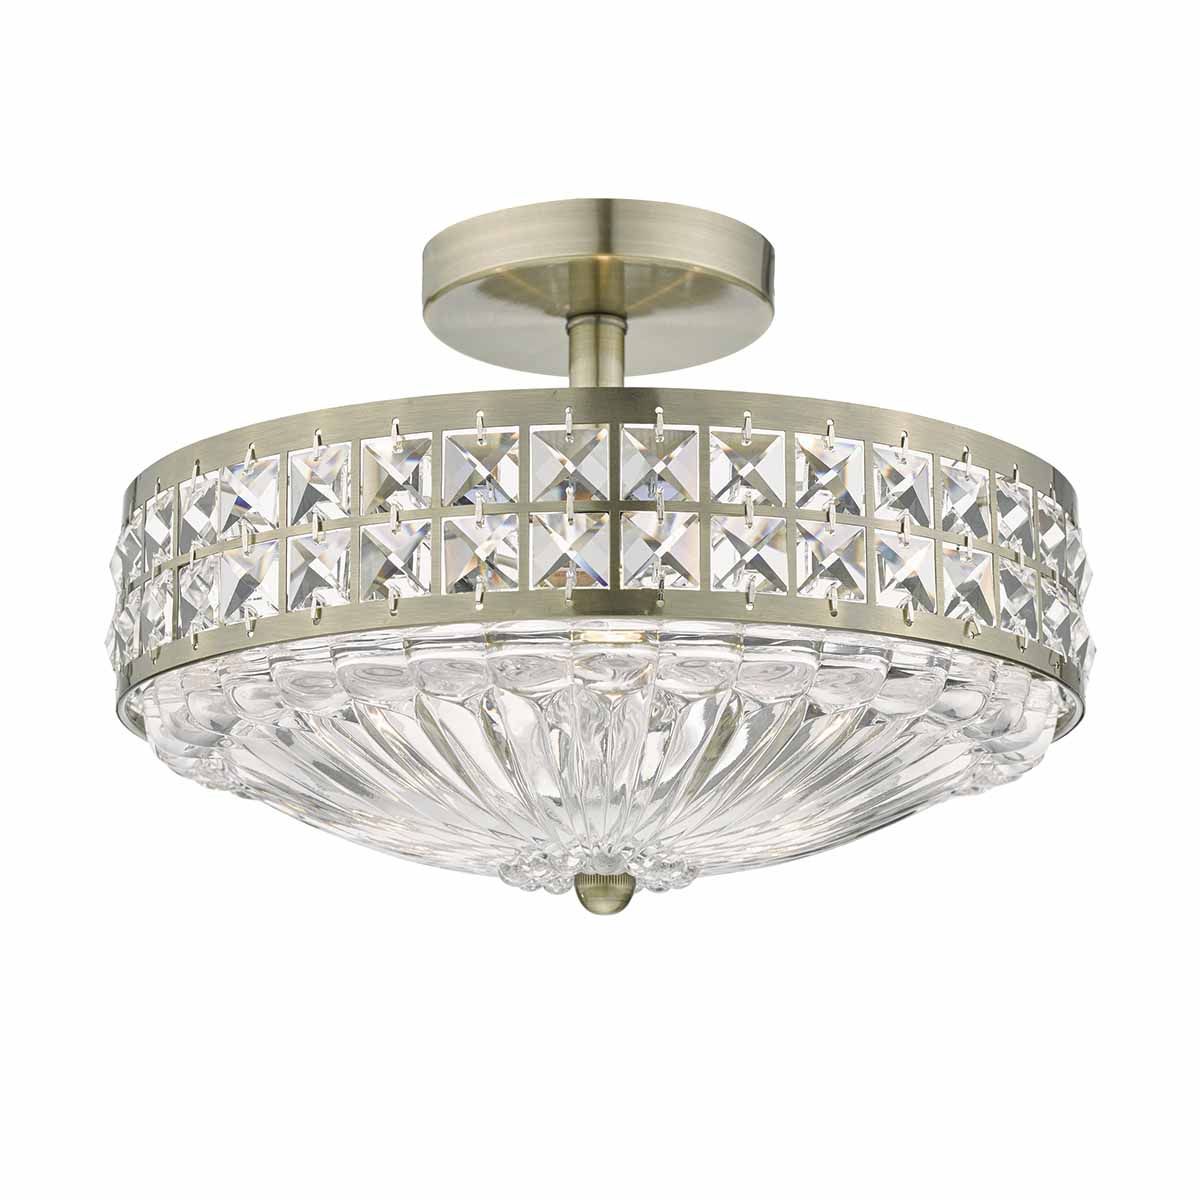 Olona 3L Light Semi Flush Antique Brass Crystal Beads and Glass Diffuser